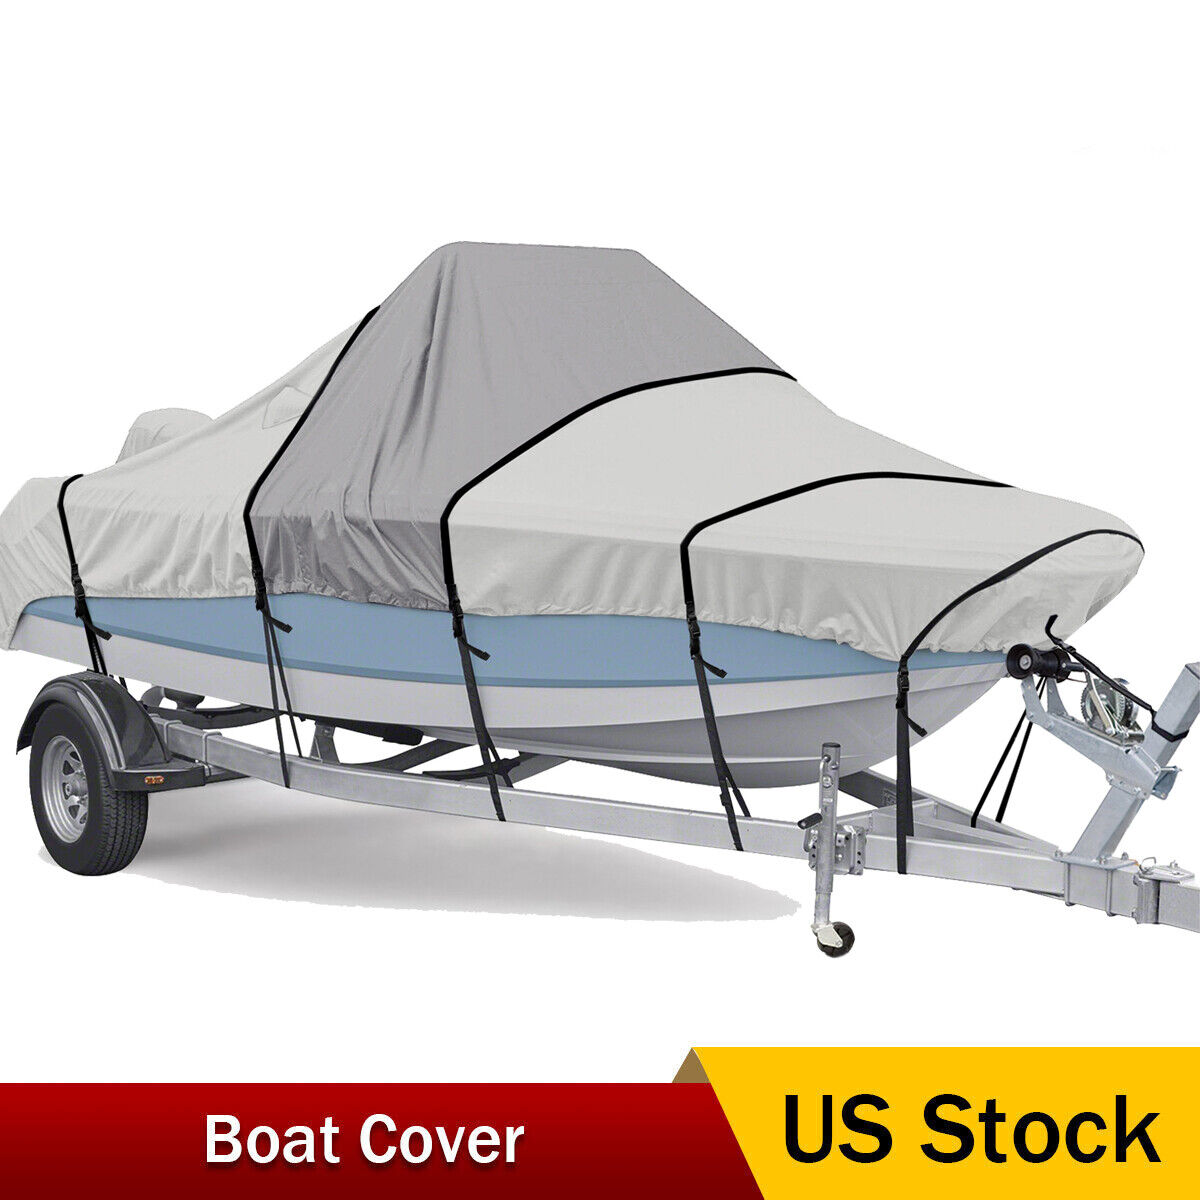 1200D Boat Cover Heavy Duty Center Console Boat Cover for 17-19ft w/ Motor Cover